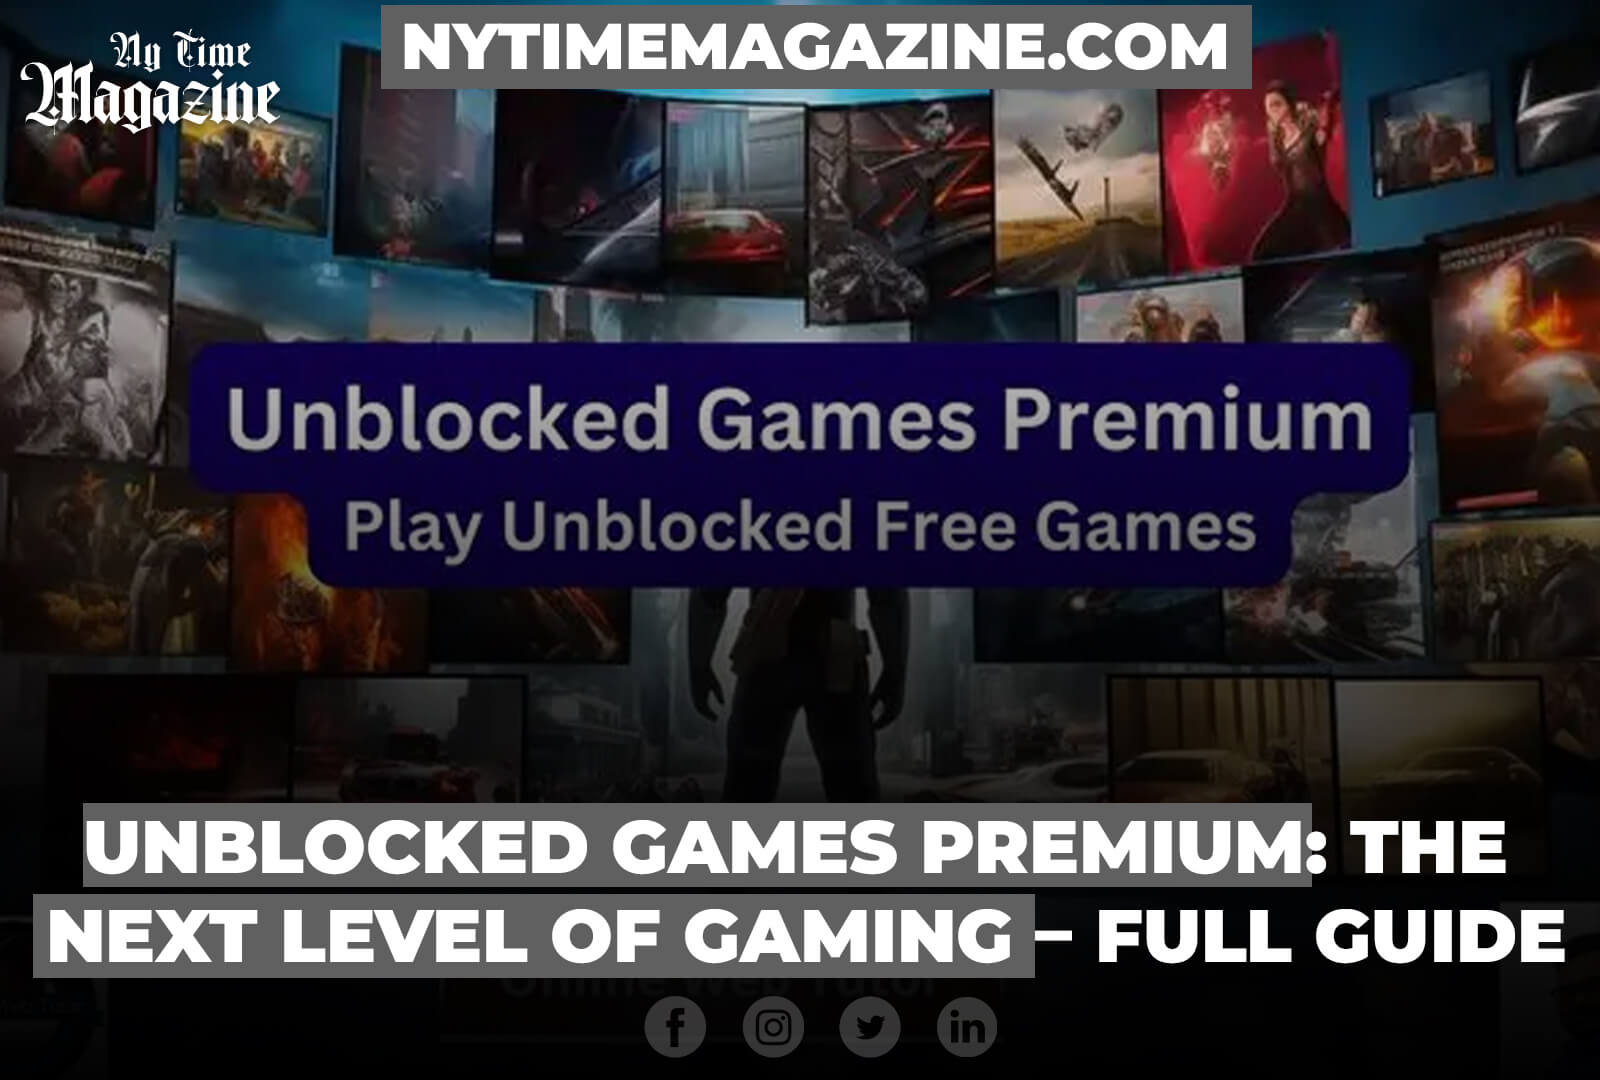 UNBLOCKED GAMES PREMIUM: THE NEXT LEVEL OF GAMING – FULL GUIDE